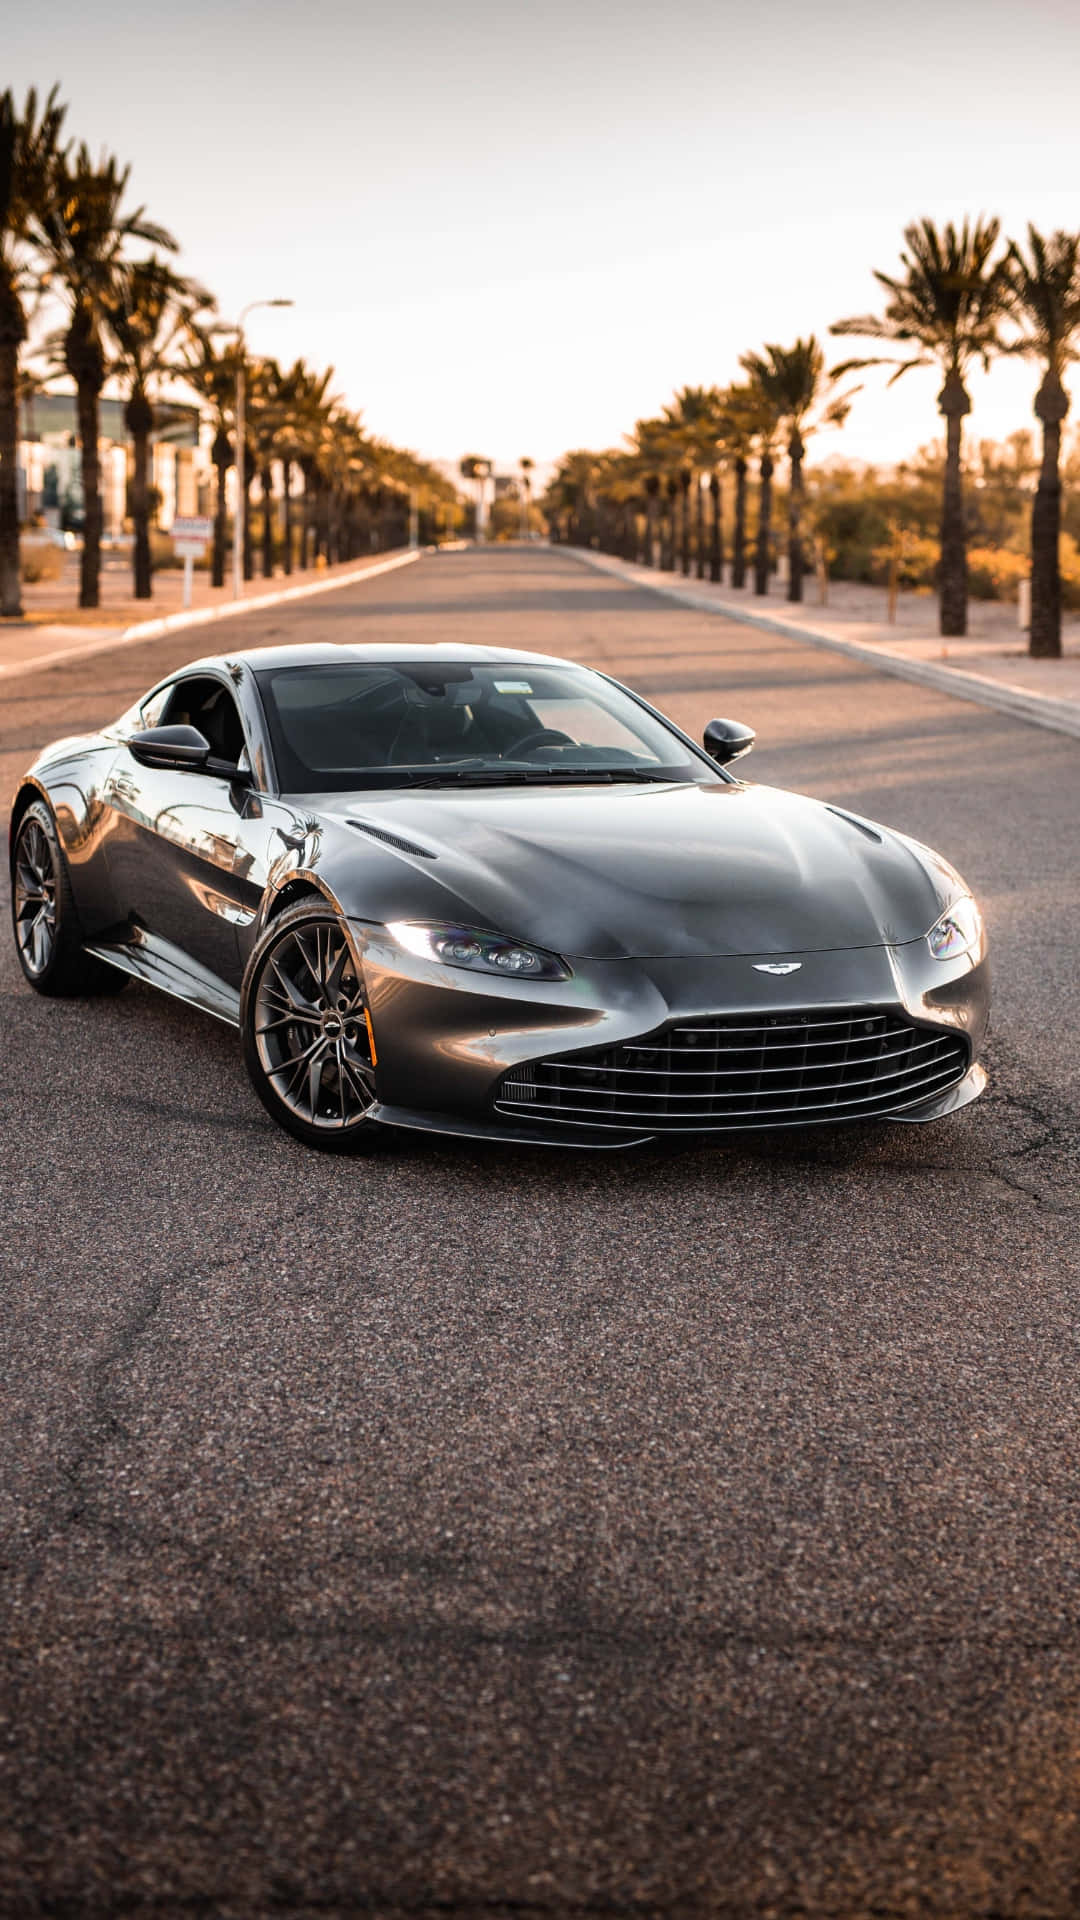 Aston Martin Vantage - The Epitome of Luxury and Performance Wallpaper